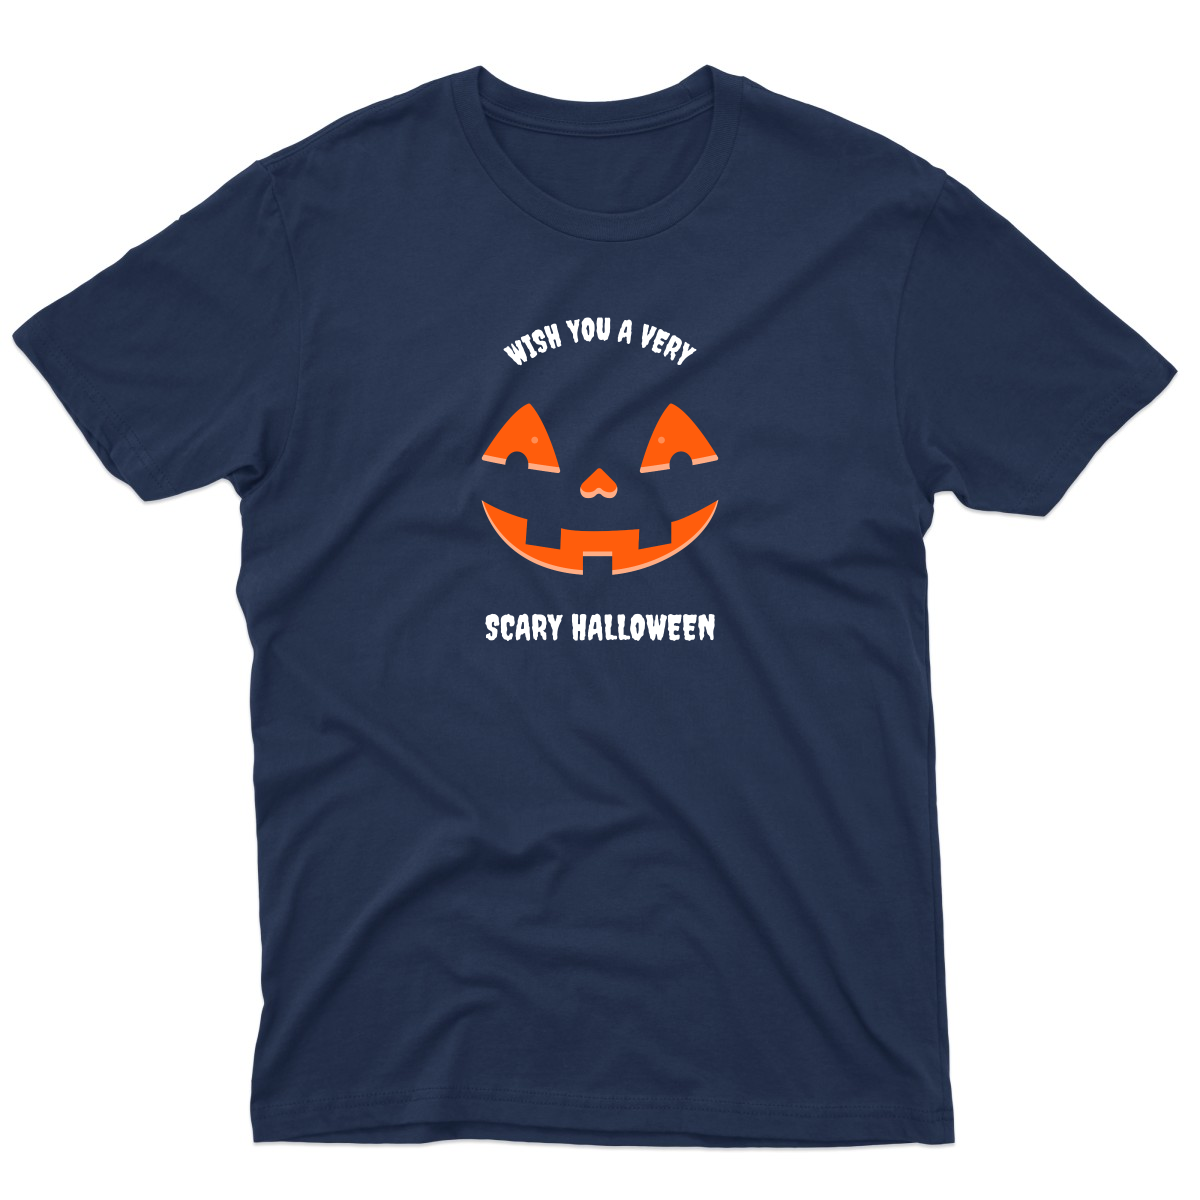 Wish You a Very Scary Halloween Men's T-shirt | Navy